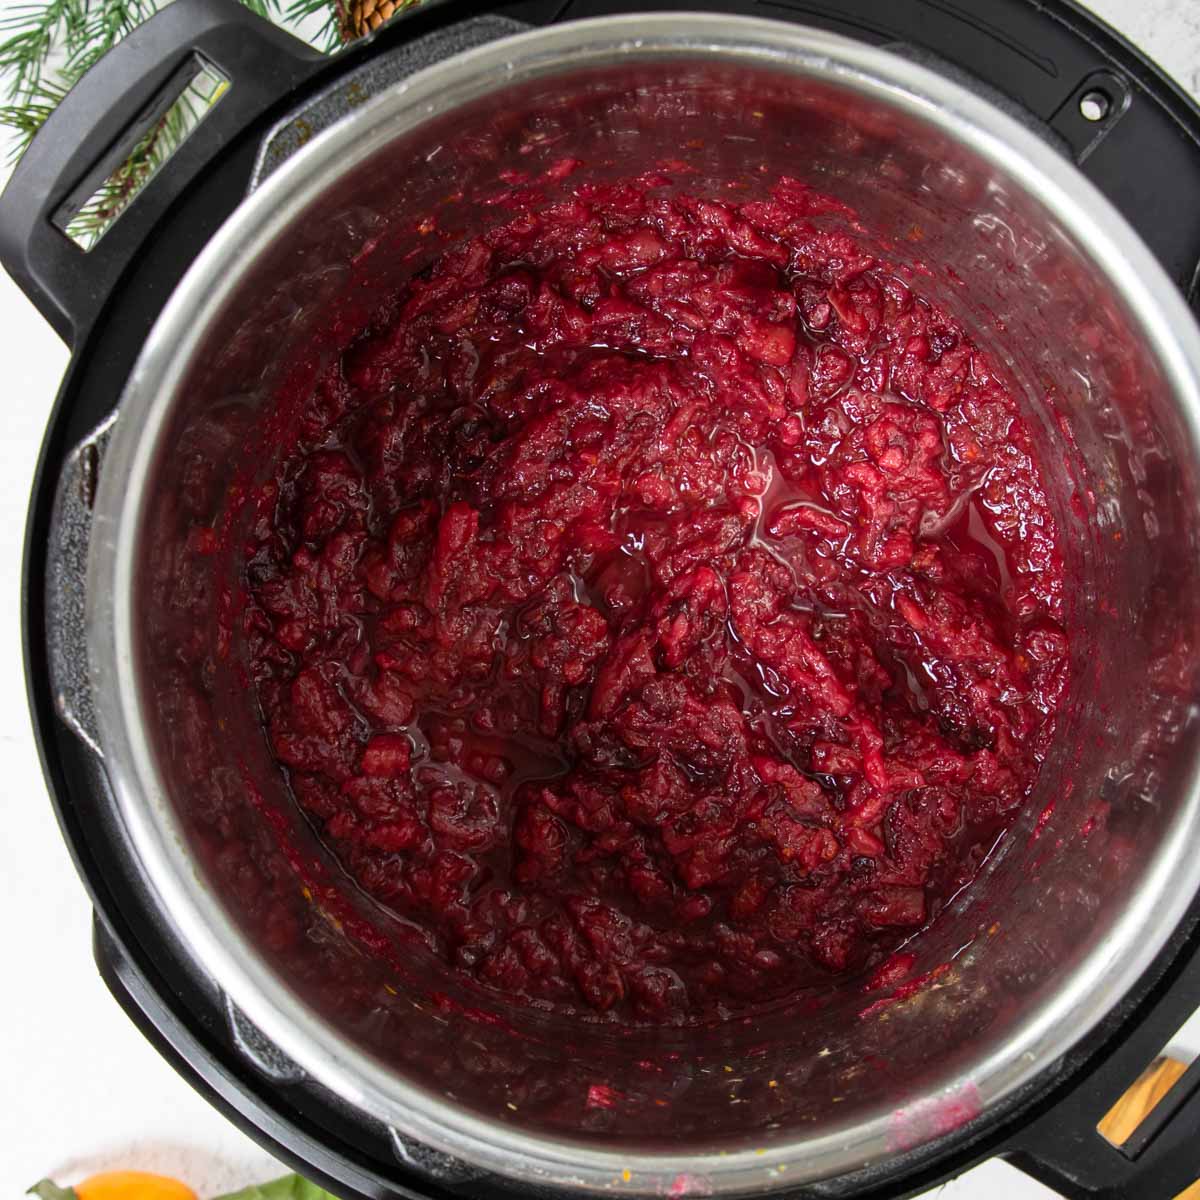 An instant pot with cranberry sauce inside